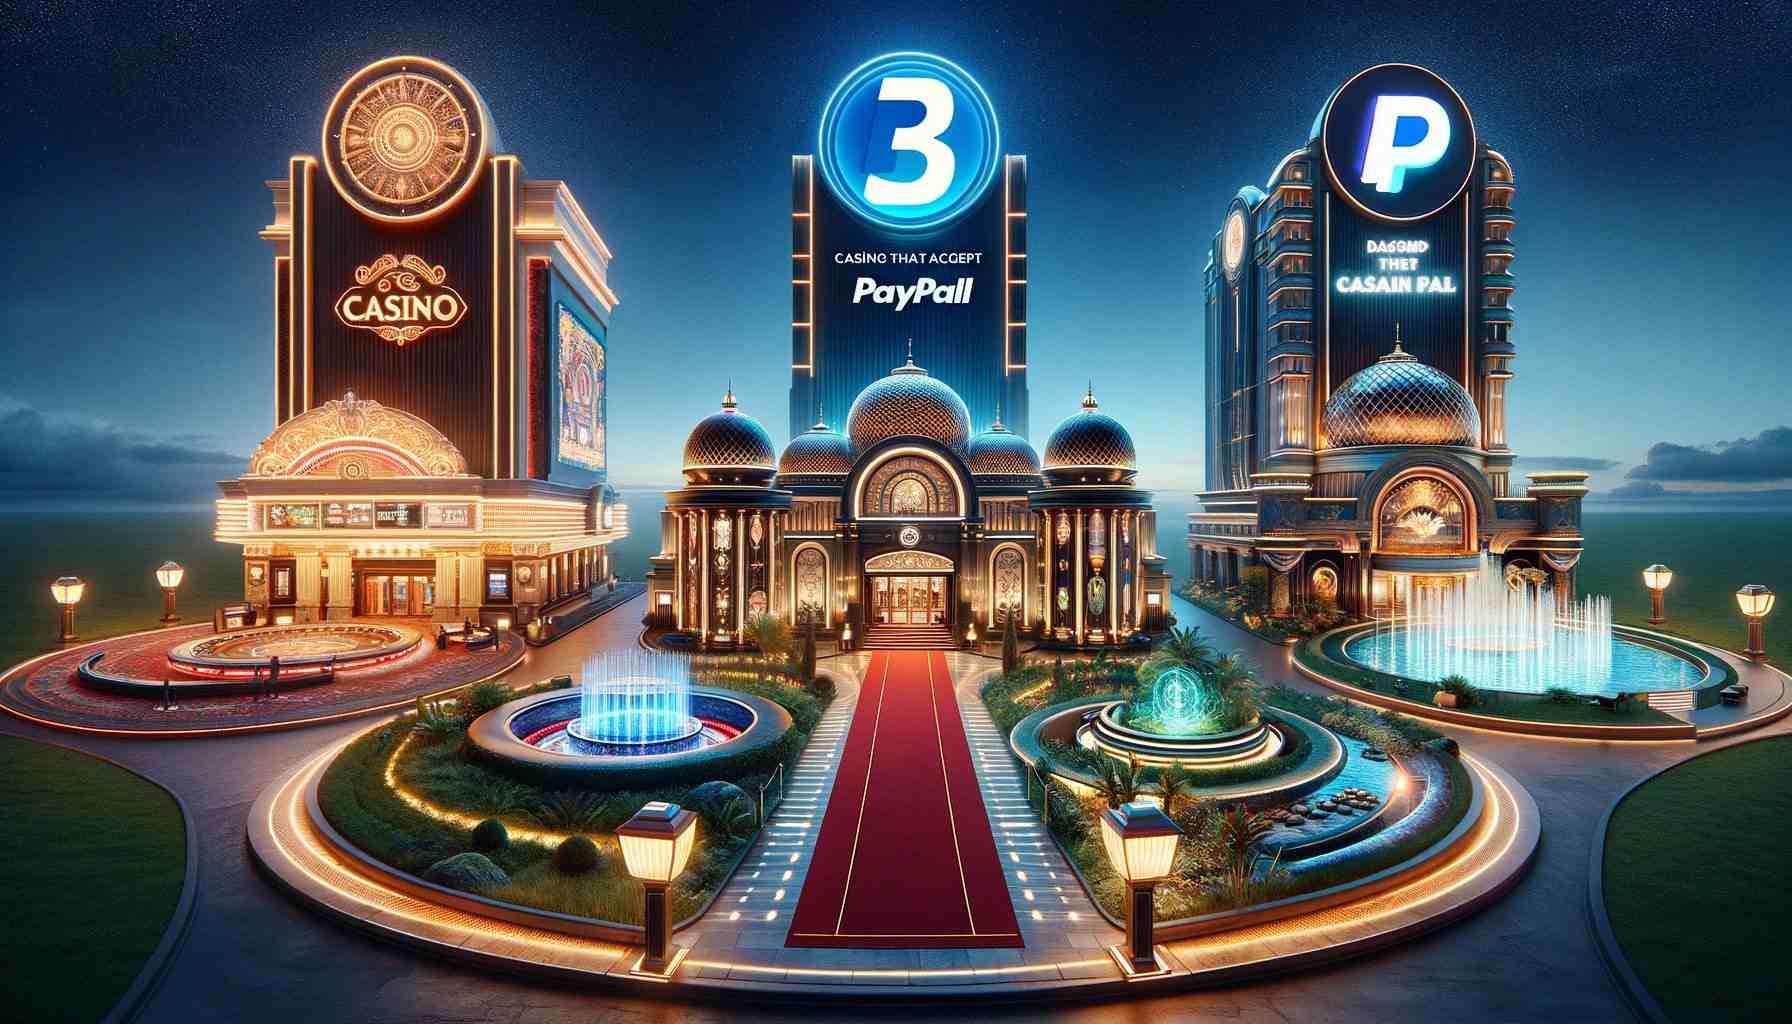 Top 3 Casinos That Accept PayPal